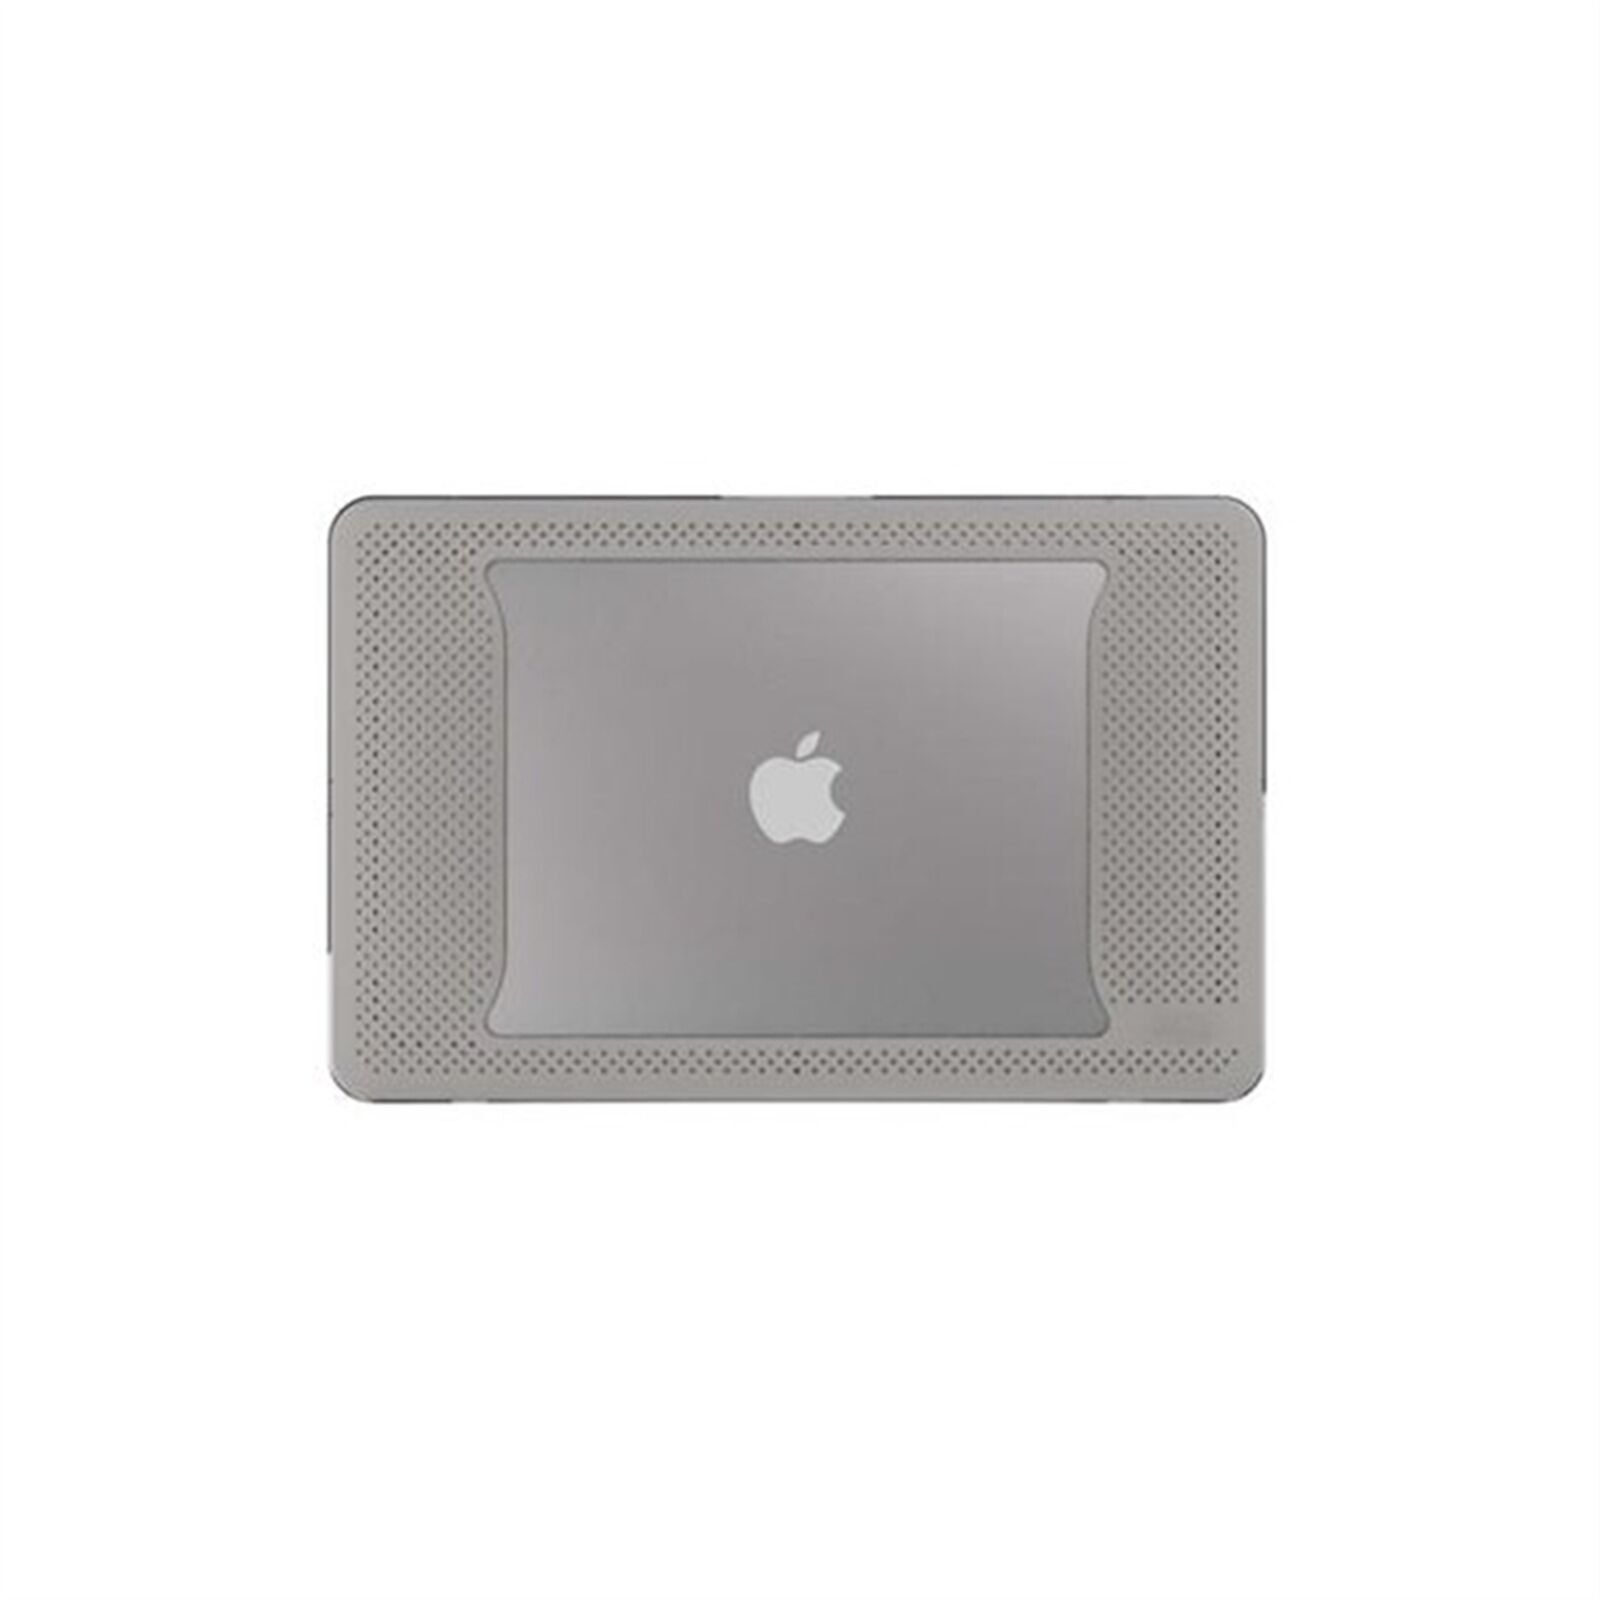 Tech21 Impact Snap Case for 11 in. Macbook Air, Gray